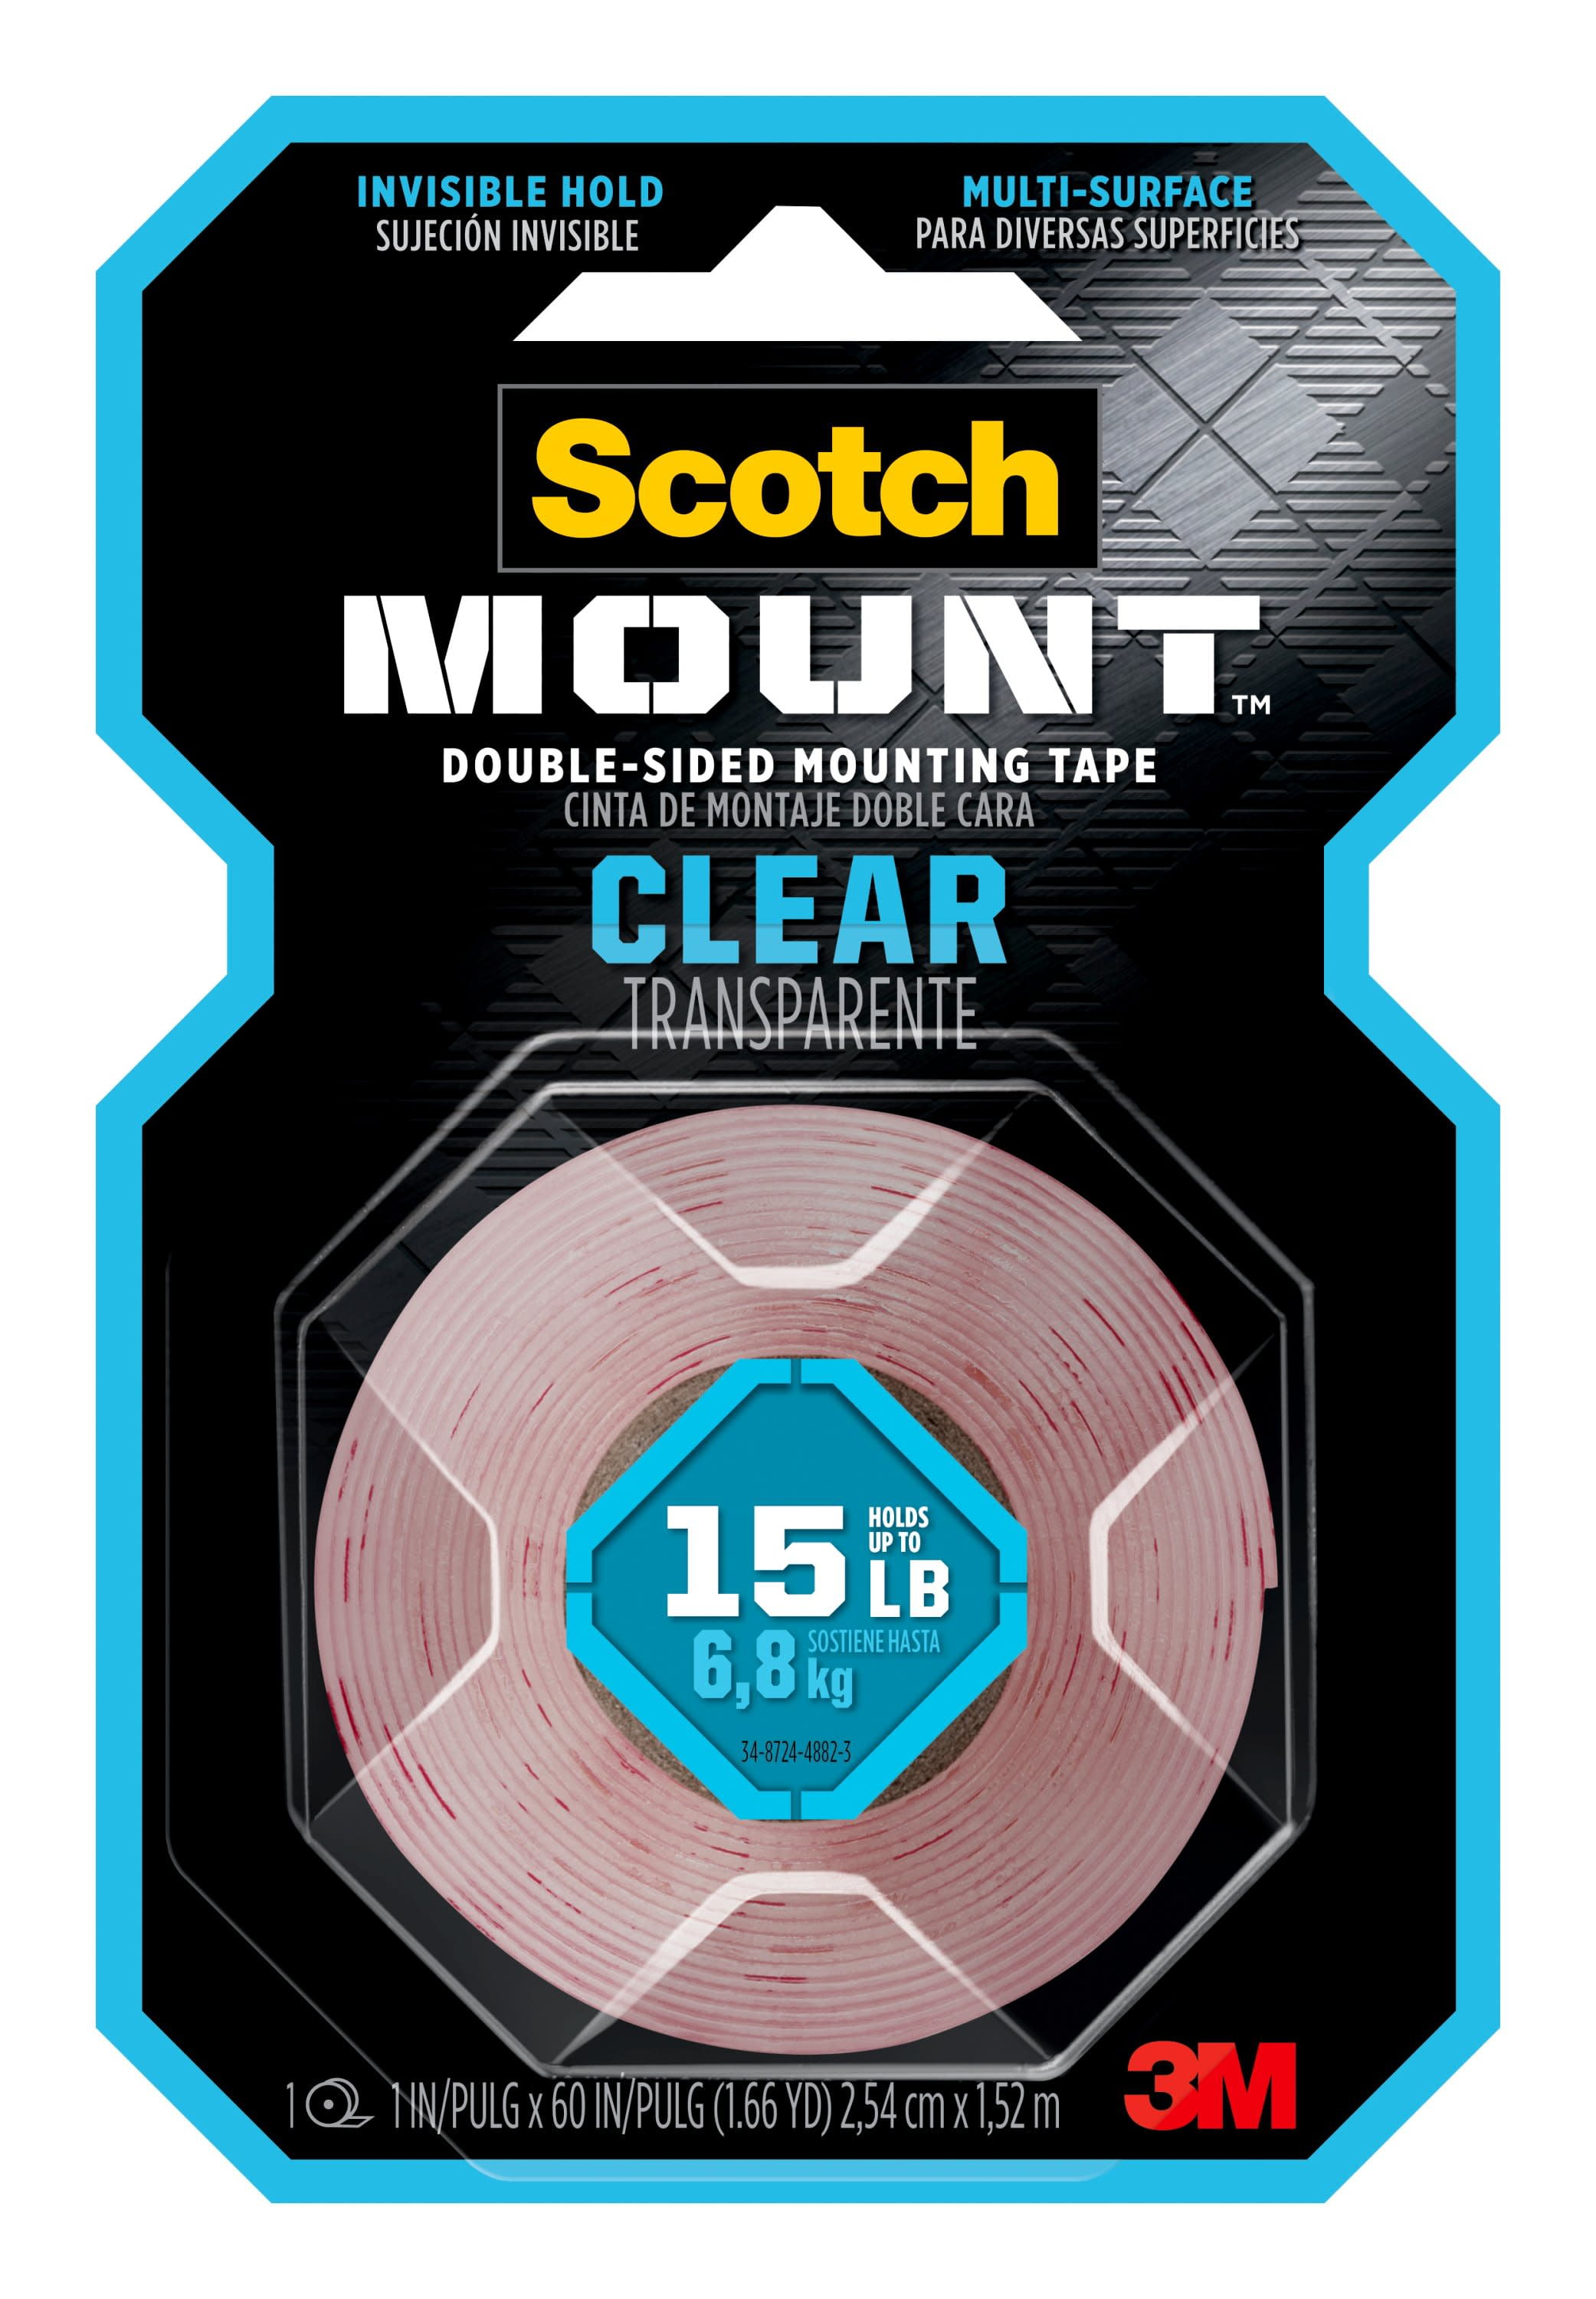 Scotch-Mount Clear Double-Sided Mounting Tape, 1 in x 60 in, 1 Roll